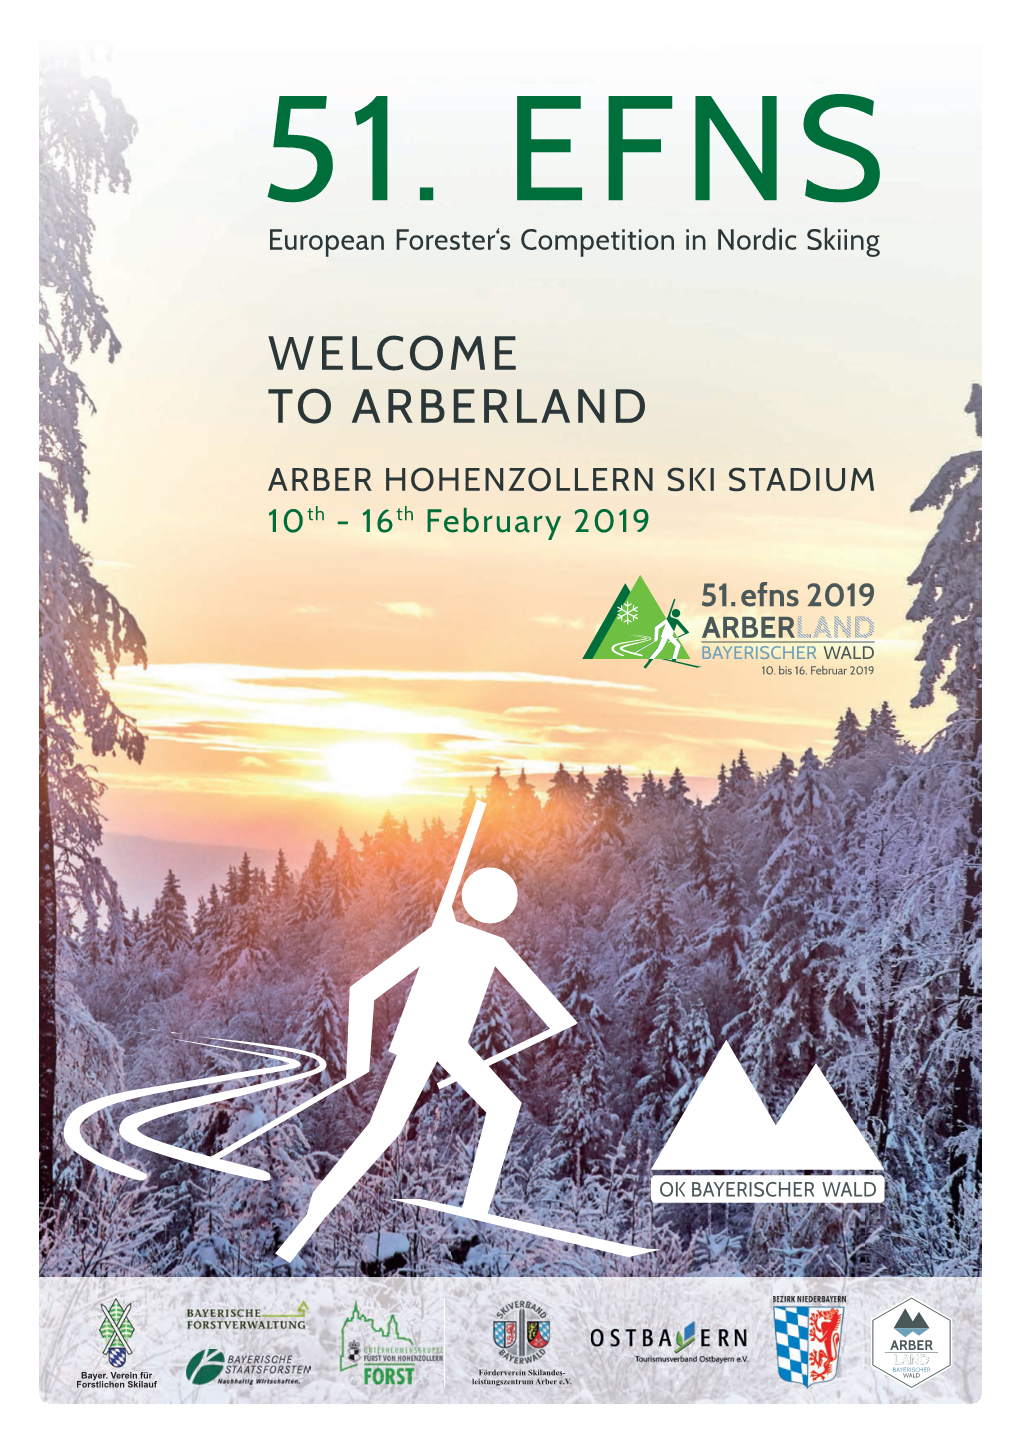 European Forester's Competition in Nordic Skiing